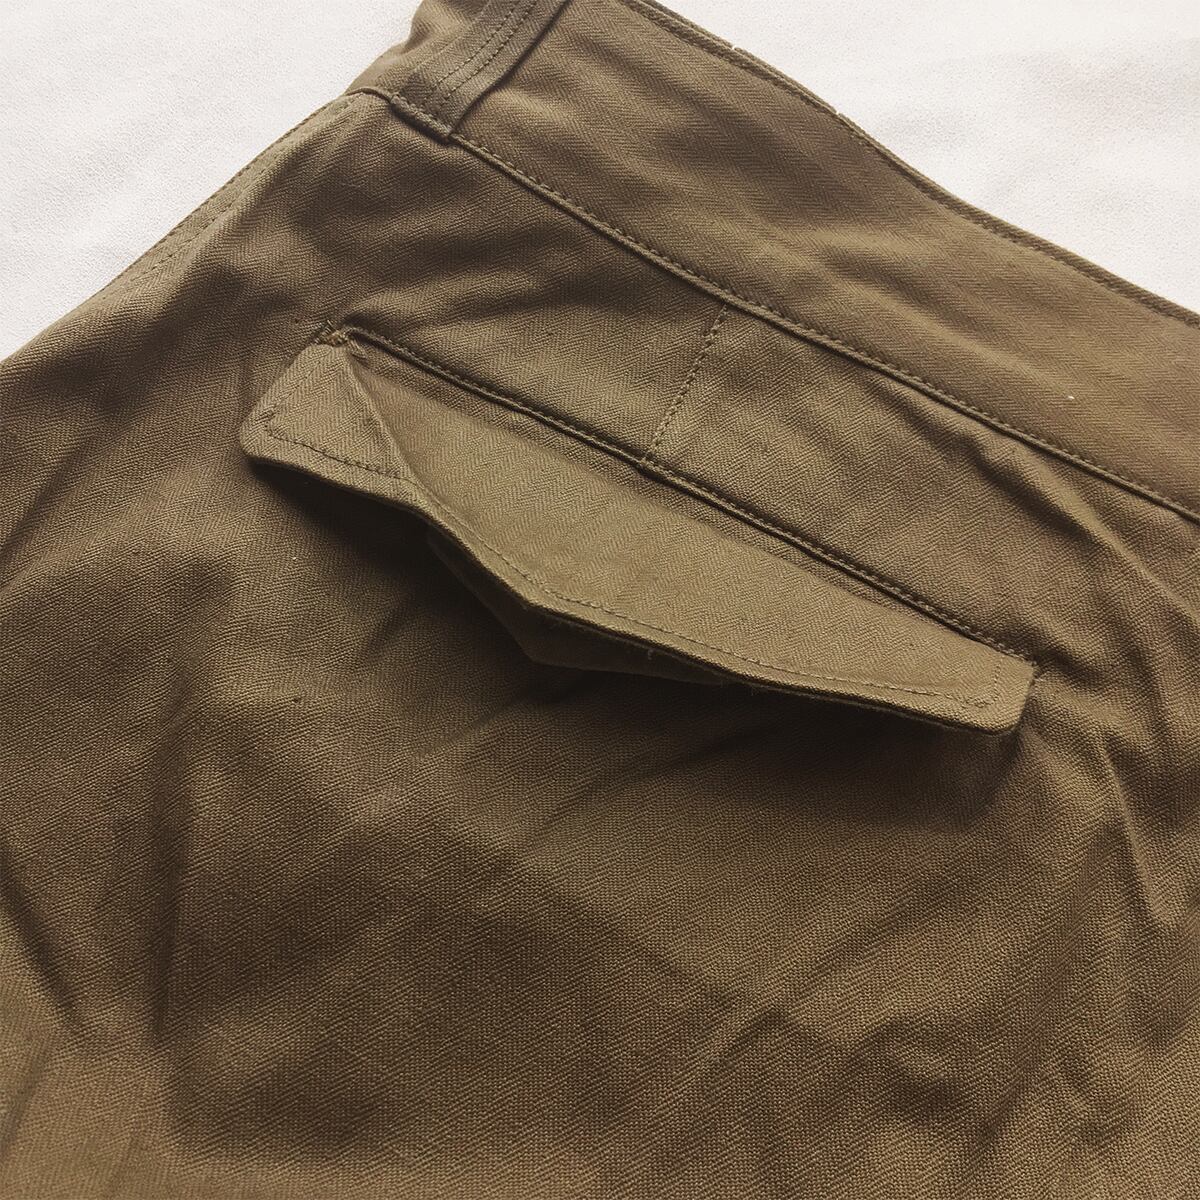 DEADSTOCK FRENCH ARMY M-47 CARGO PANTS LATE MODEL ］フランス軍 M